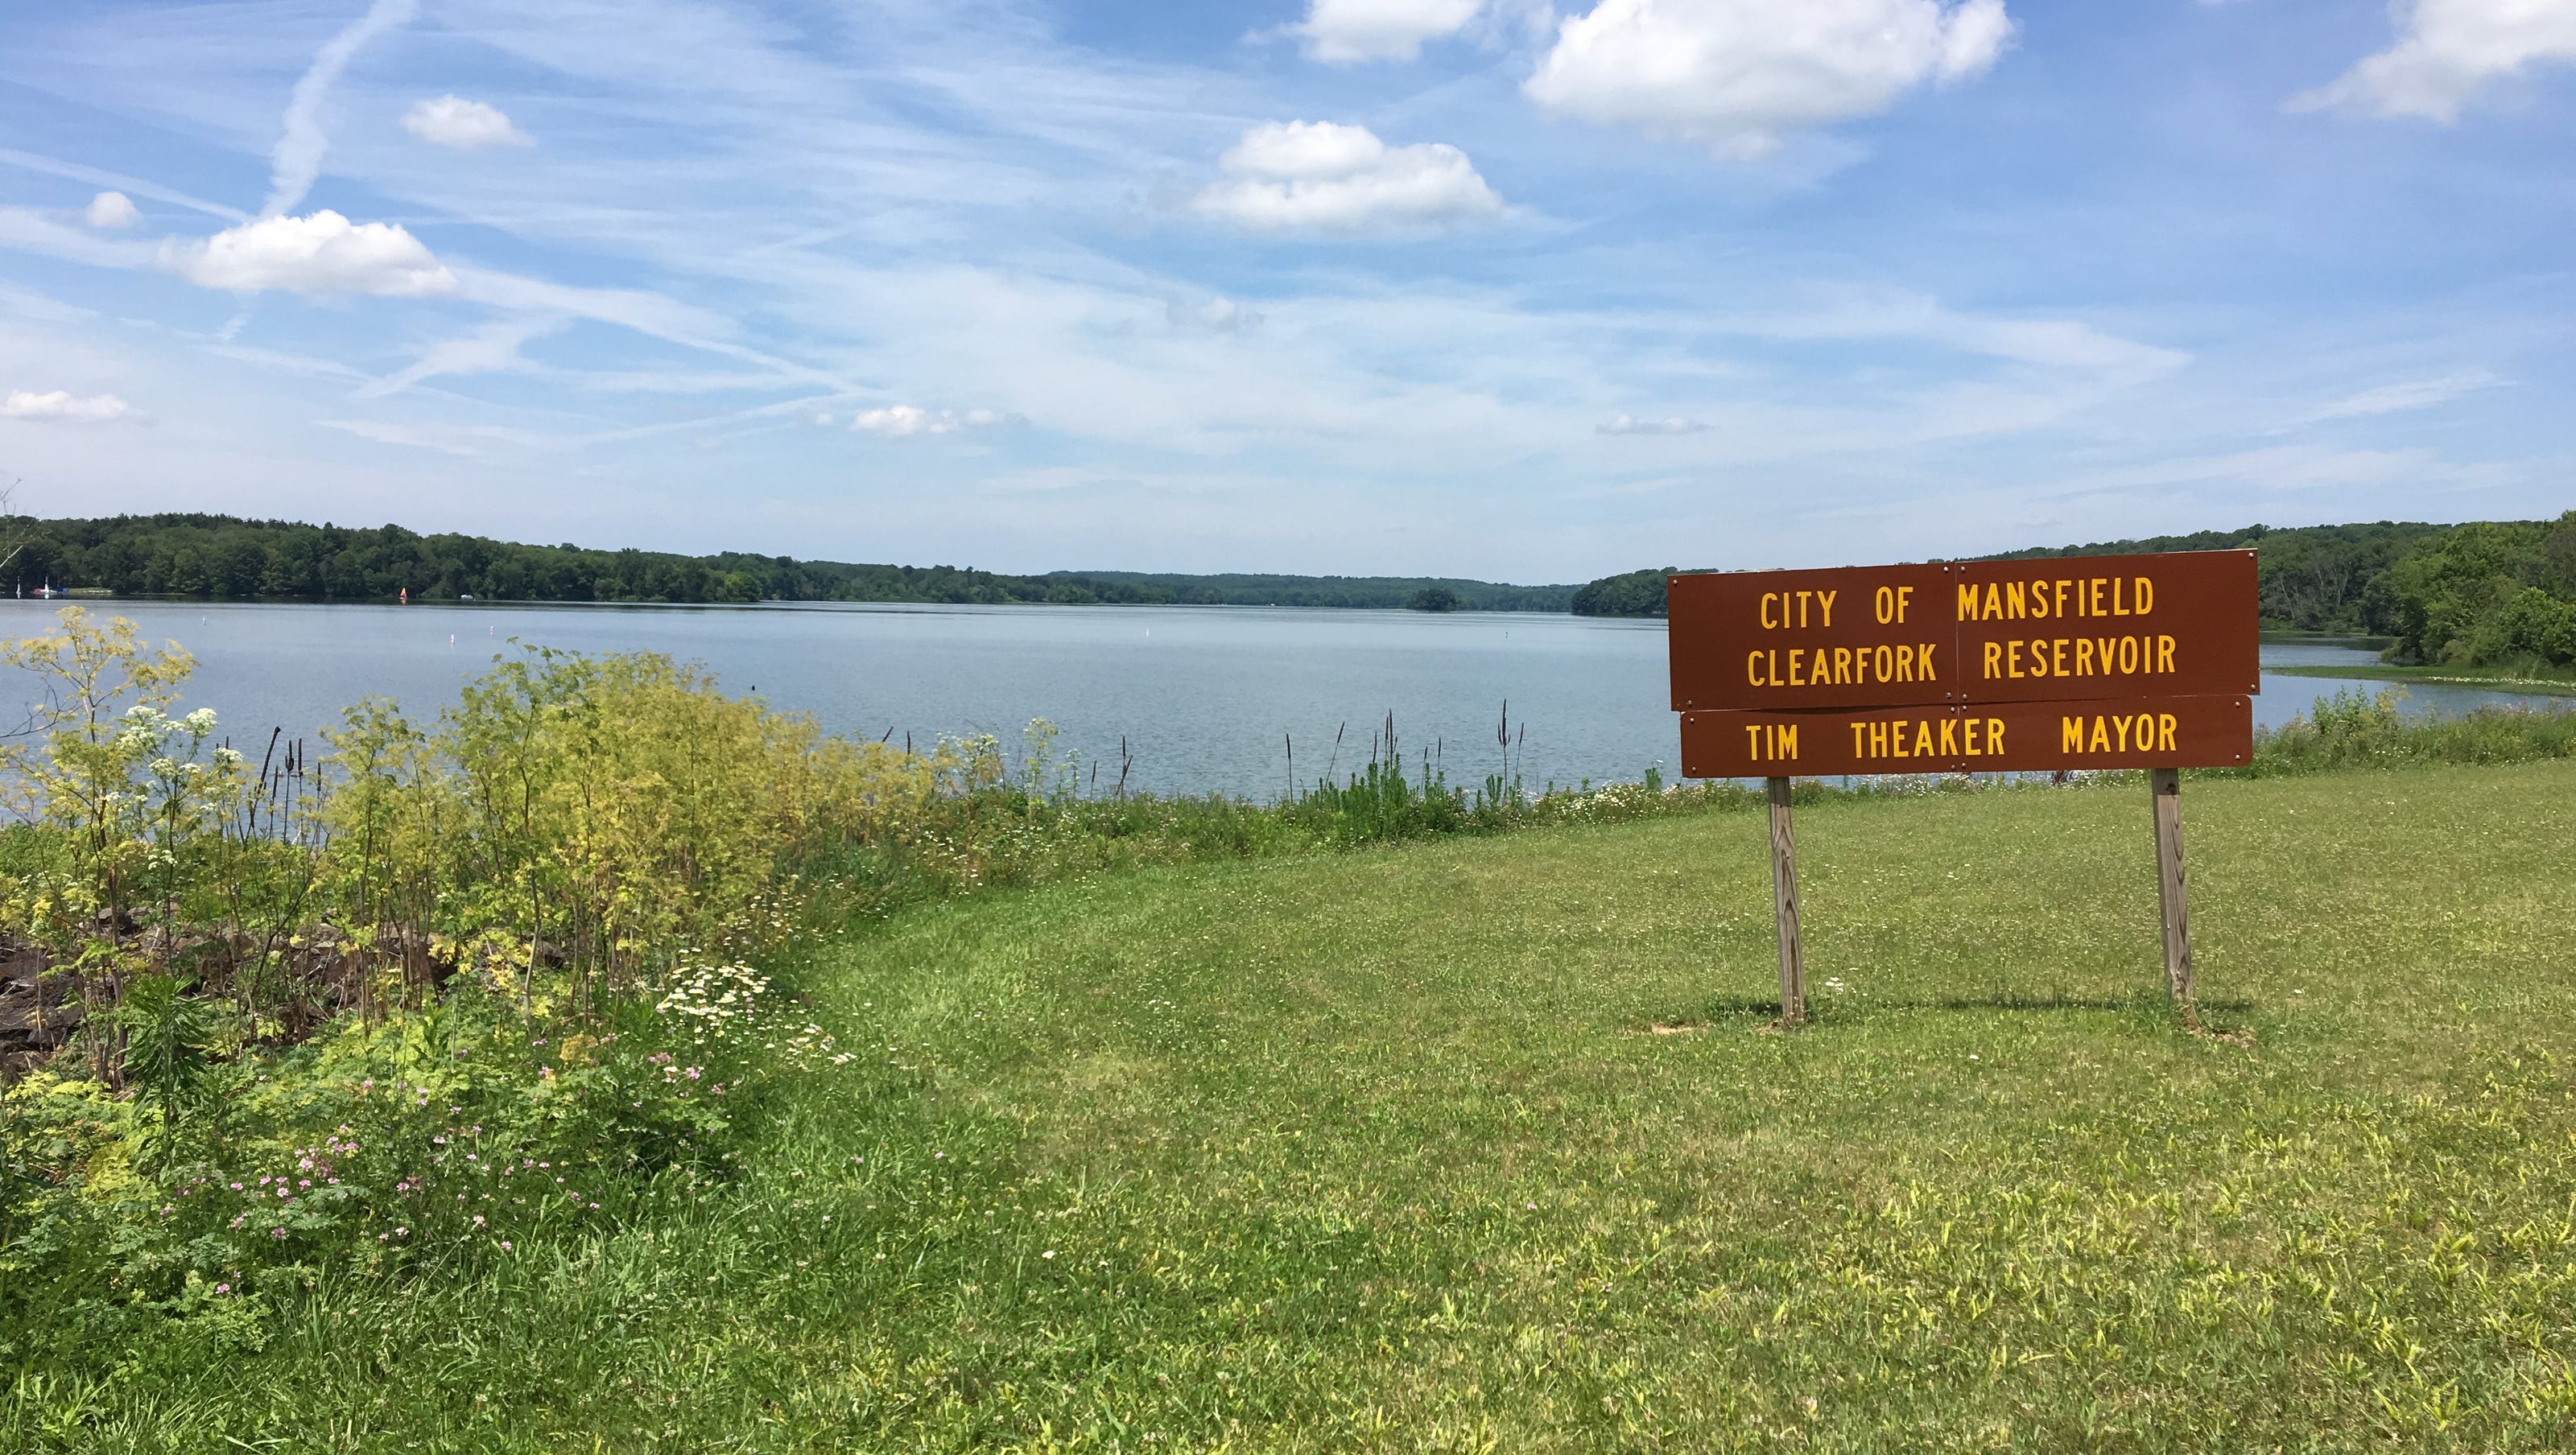  Clearfork Campground: Discussions continue, but no action 